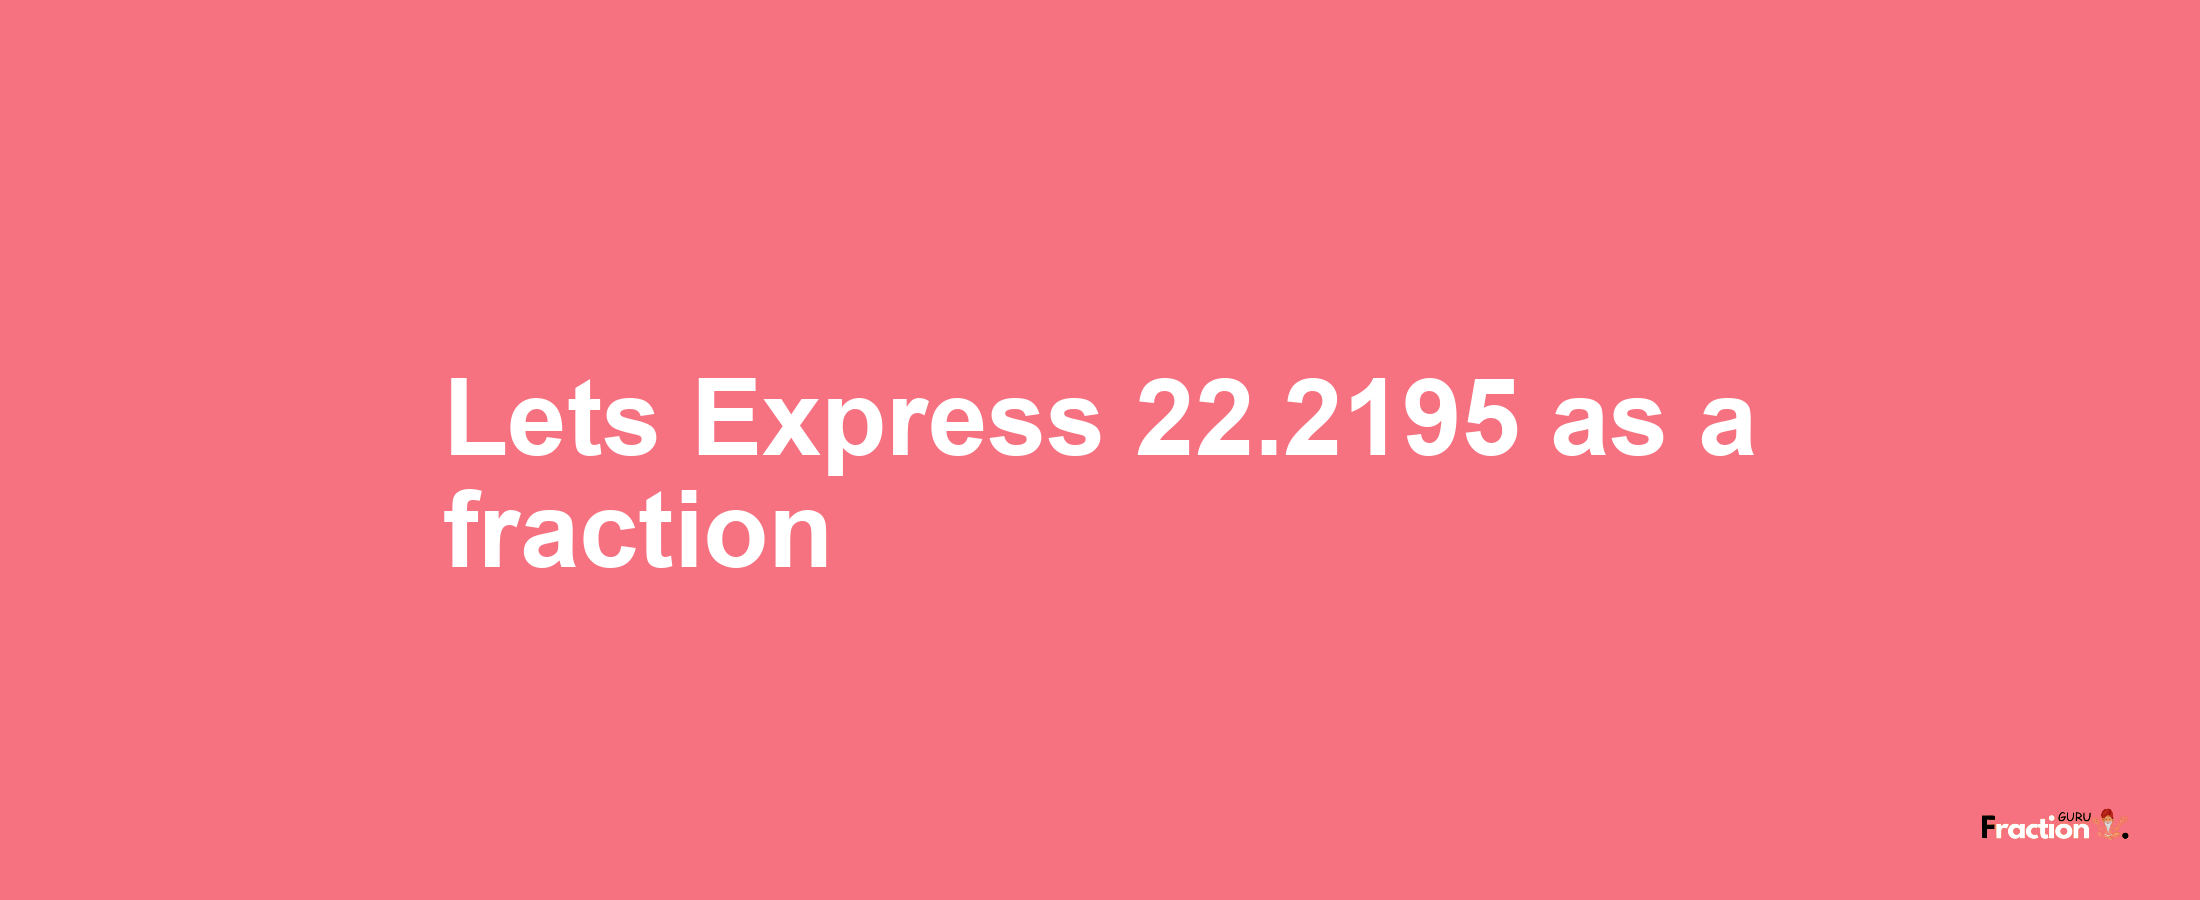 Lets Express 22.2195 as afraction